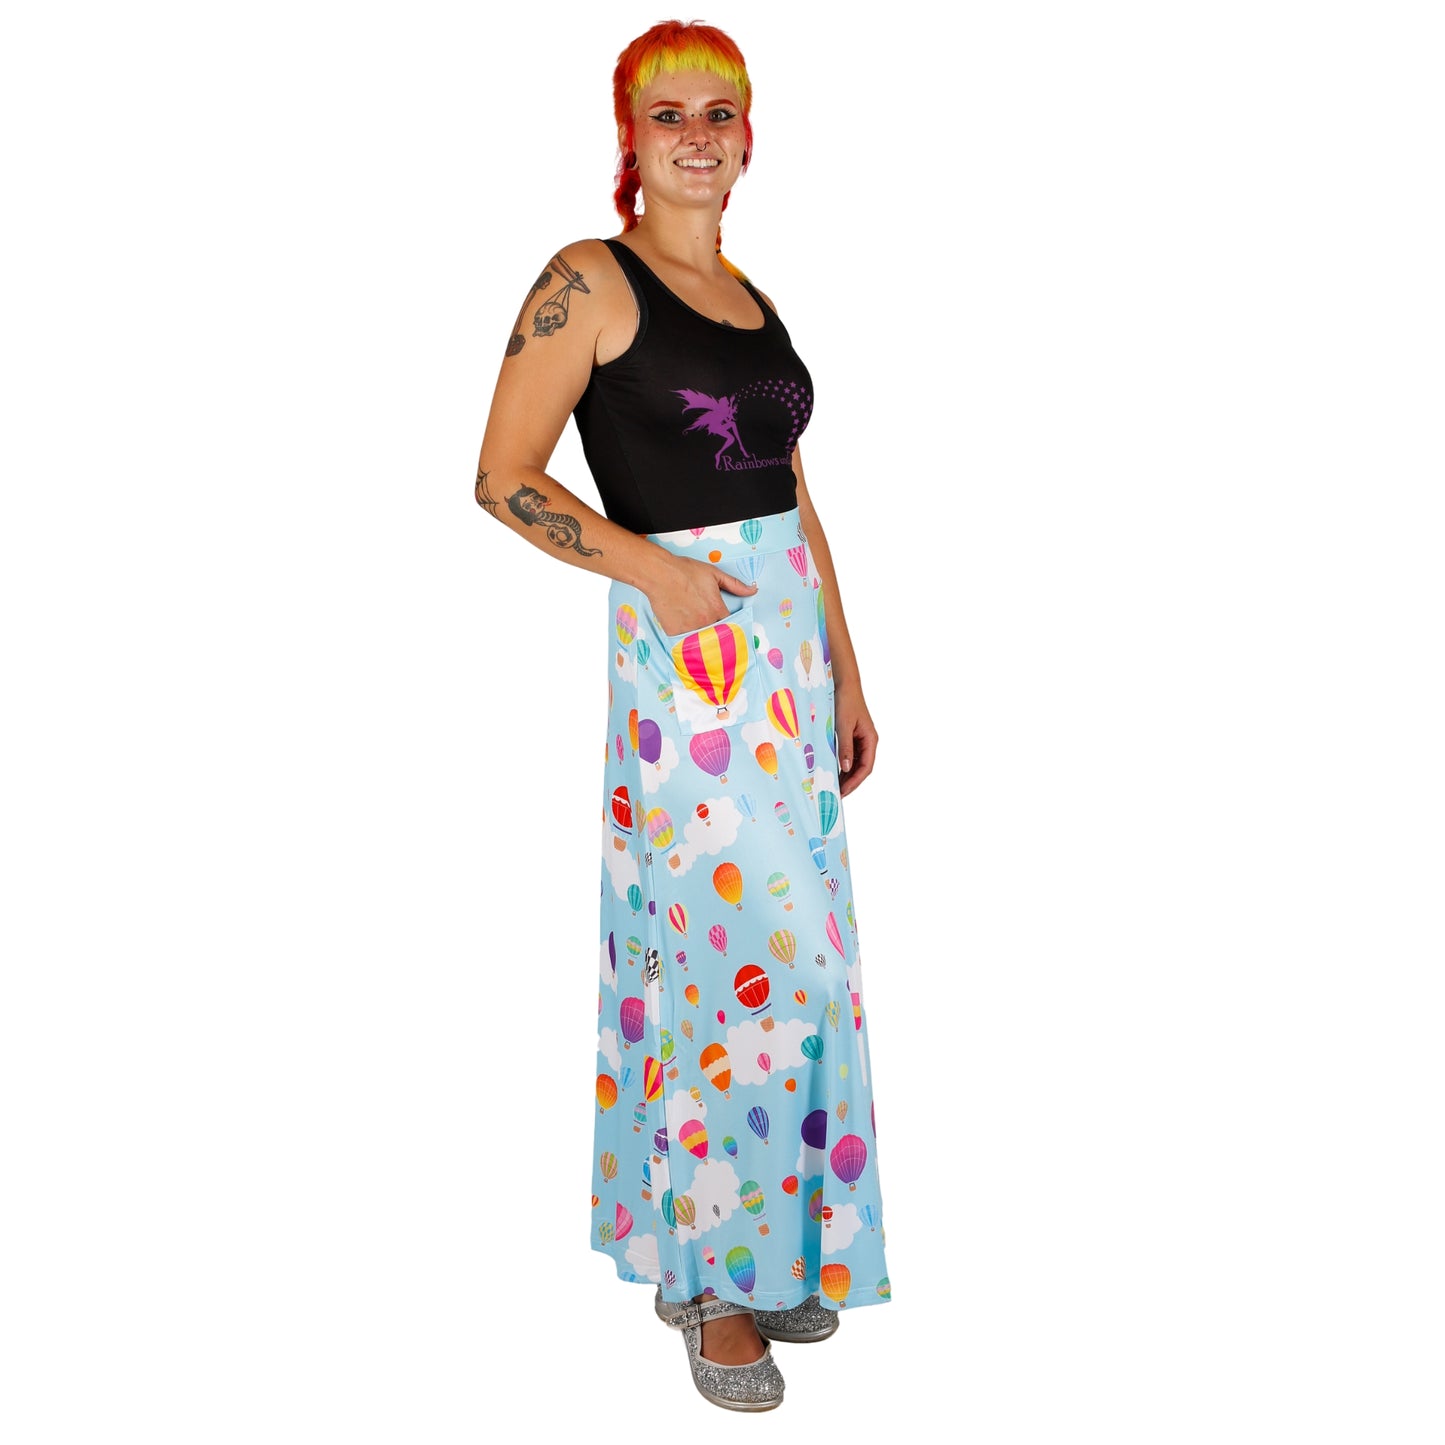 Whimsy Maxi Skirt by RainbowsAndFairies.com.au (Balloons - Hot Air Balloon - Long Skirt - Vintage Inspired - Boho - Skirt With Pockets) - SKU: CL_MAXIS_WHIMS_ORG - Pic-04